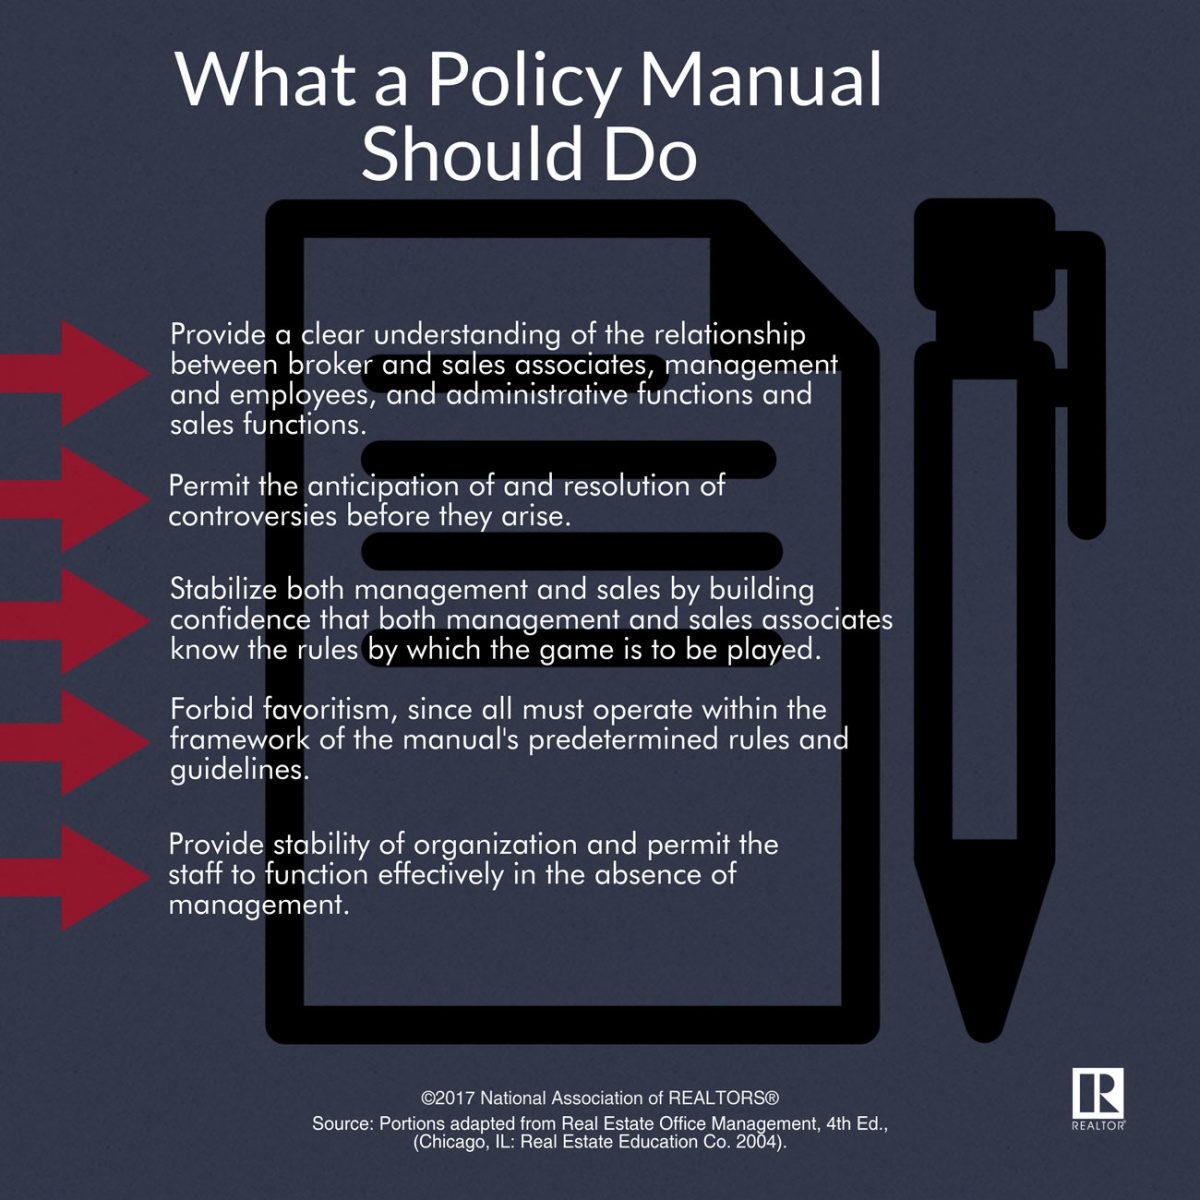 What a Policy Manual Should Do